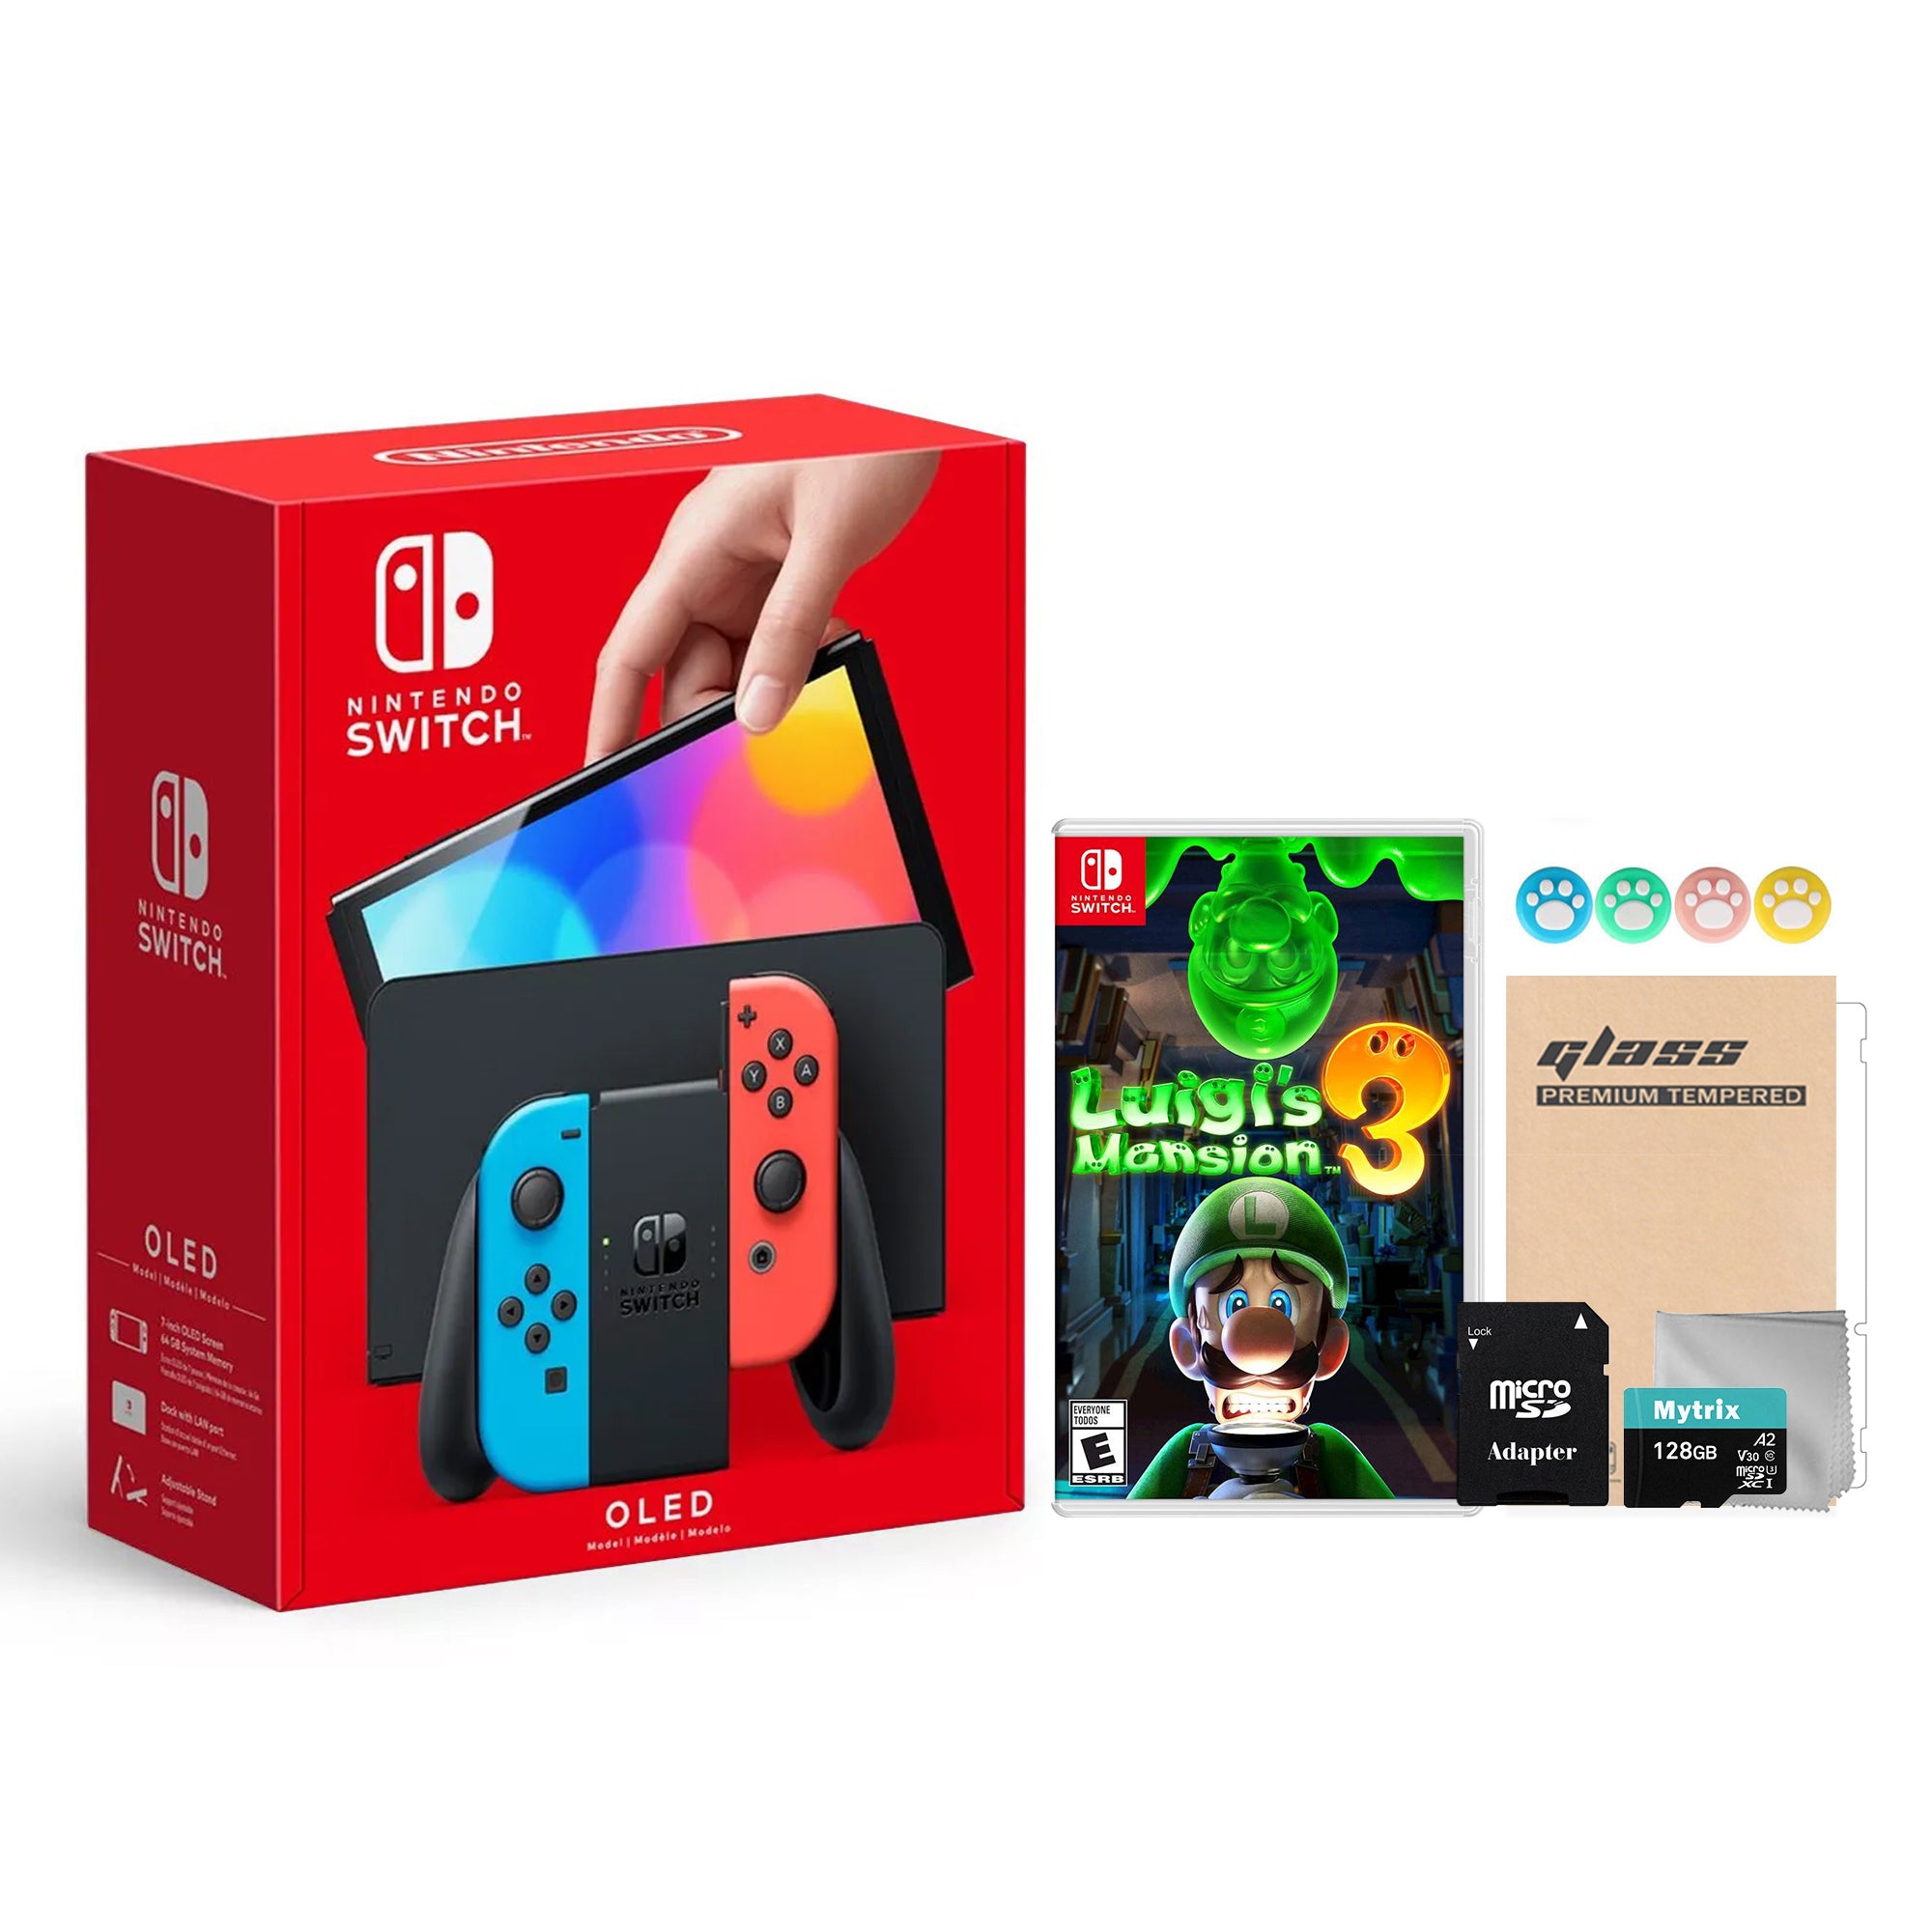 2022 New Nintendo Switch OLED Model Neon Red & Blue Joy Con 64GB Console HD Screen & LAN-Port Dock with Luigi's Mansion 3, Mytrix 128GB MicroSD Card and Accessories